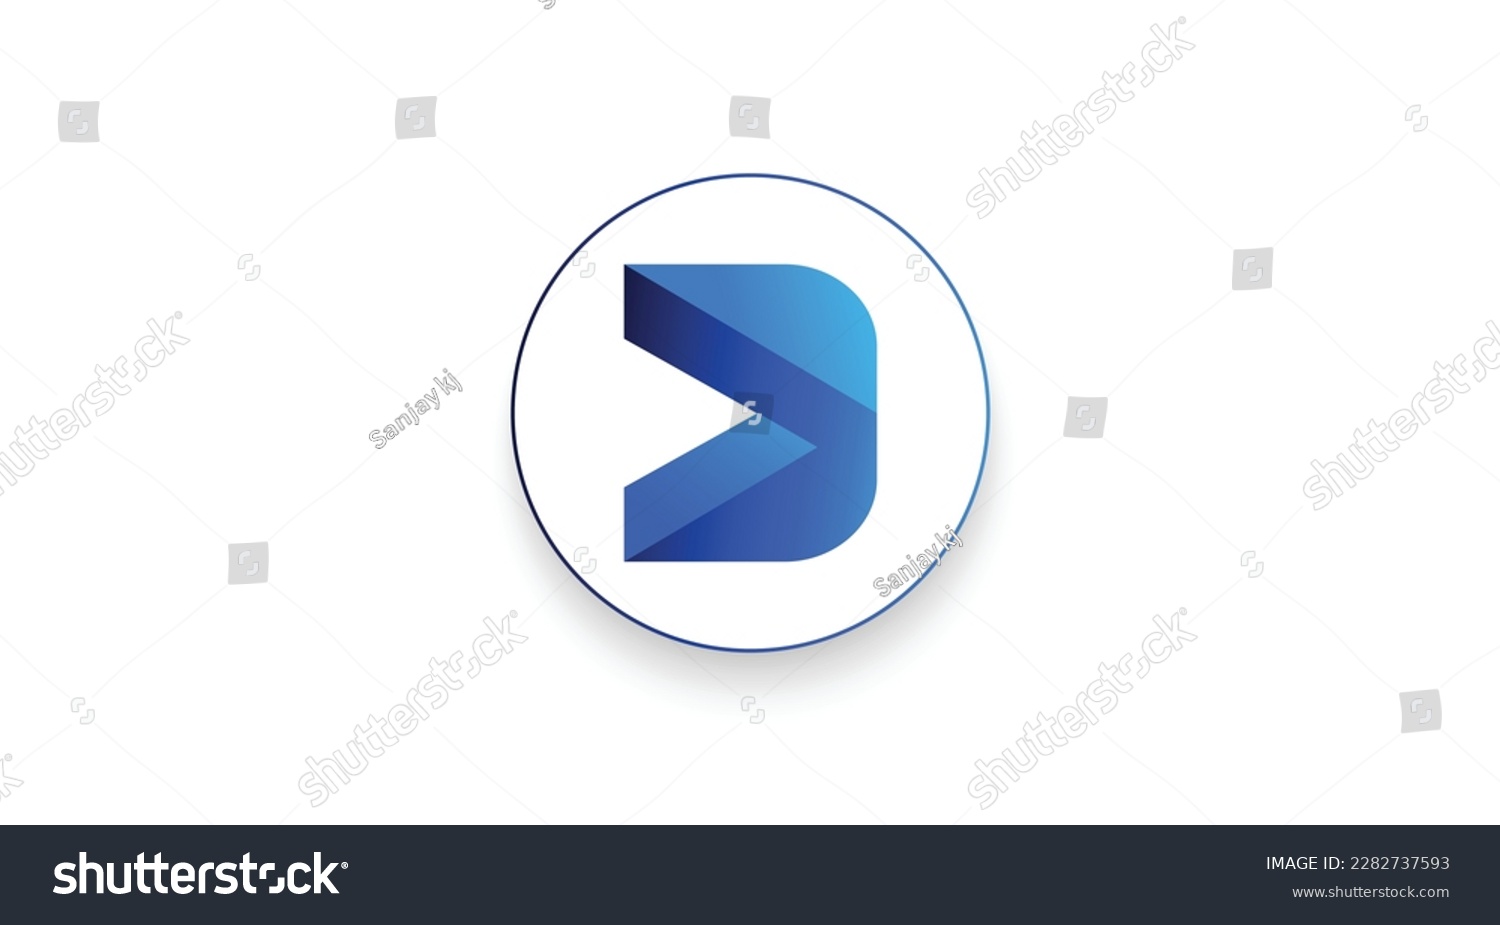 SVG of Decentralized Social, DESO cryptocurrency logo on isolated background with copy space. 3d vector illustration of Decentralized Social, DESO Token icon banner design concept. svg